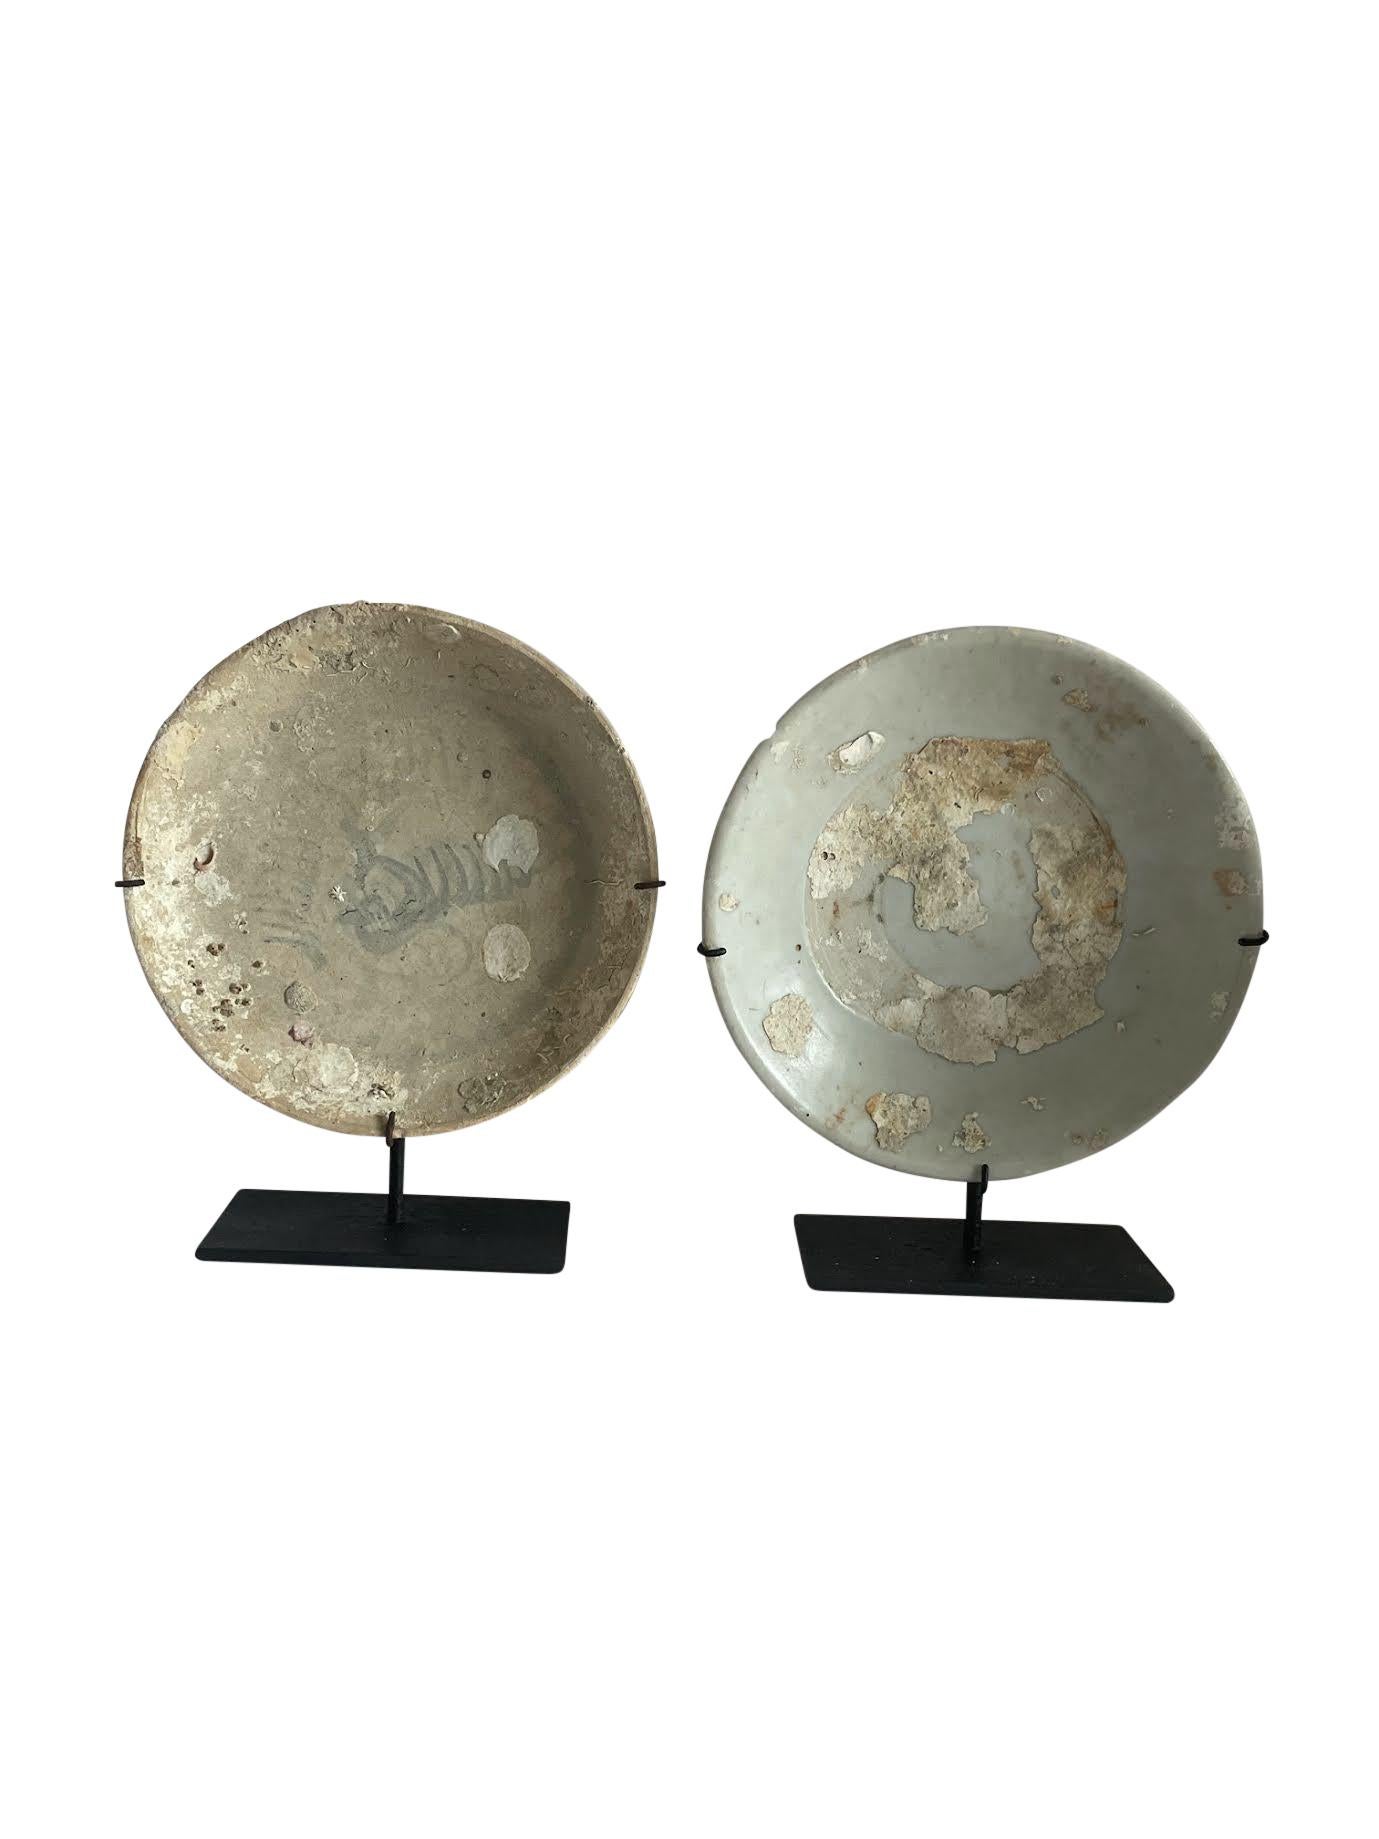 16th century China two ceramic plates discovered from ship wreck. 
From the Ming dynasty.
Beautiful natural weathered patina.
Plates measure 7